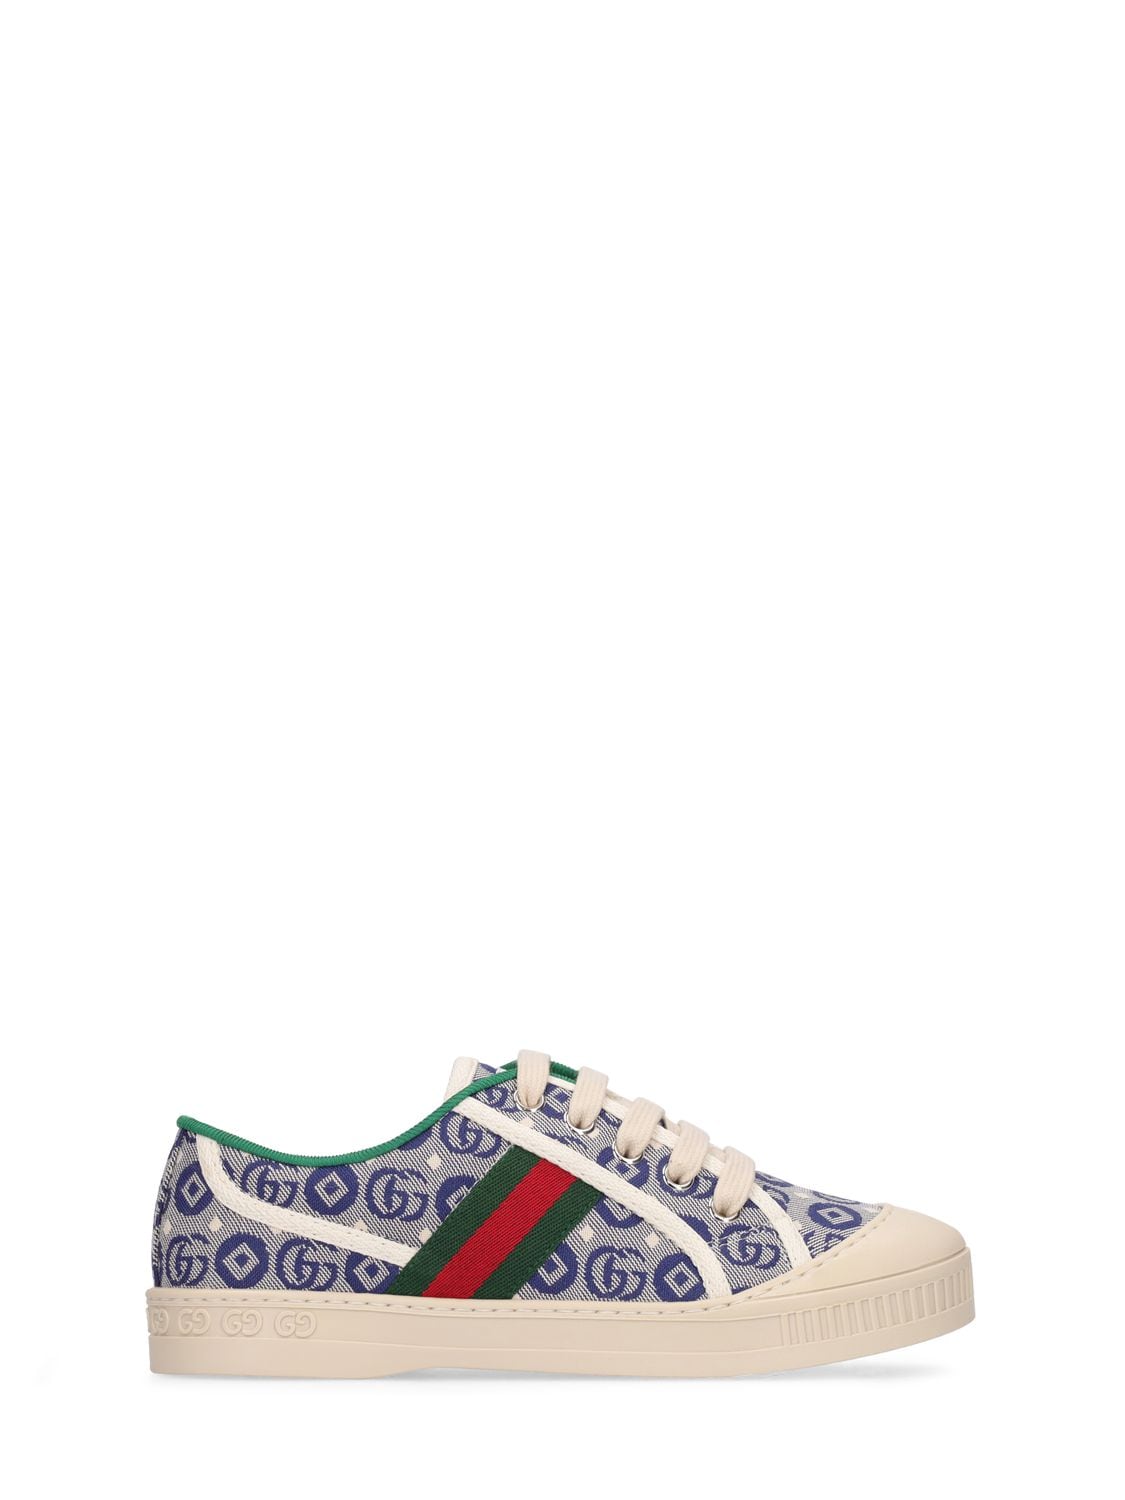 Image of Gucci Tennis 1977 Label Sneakers